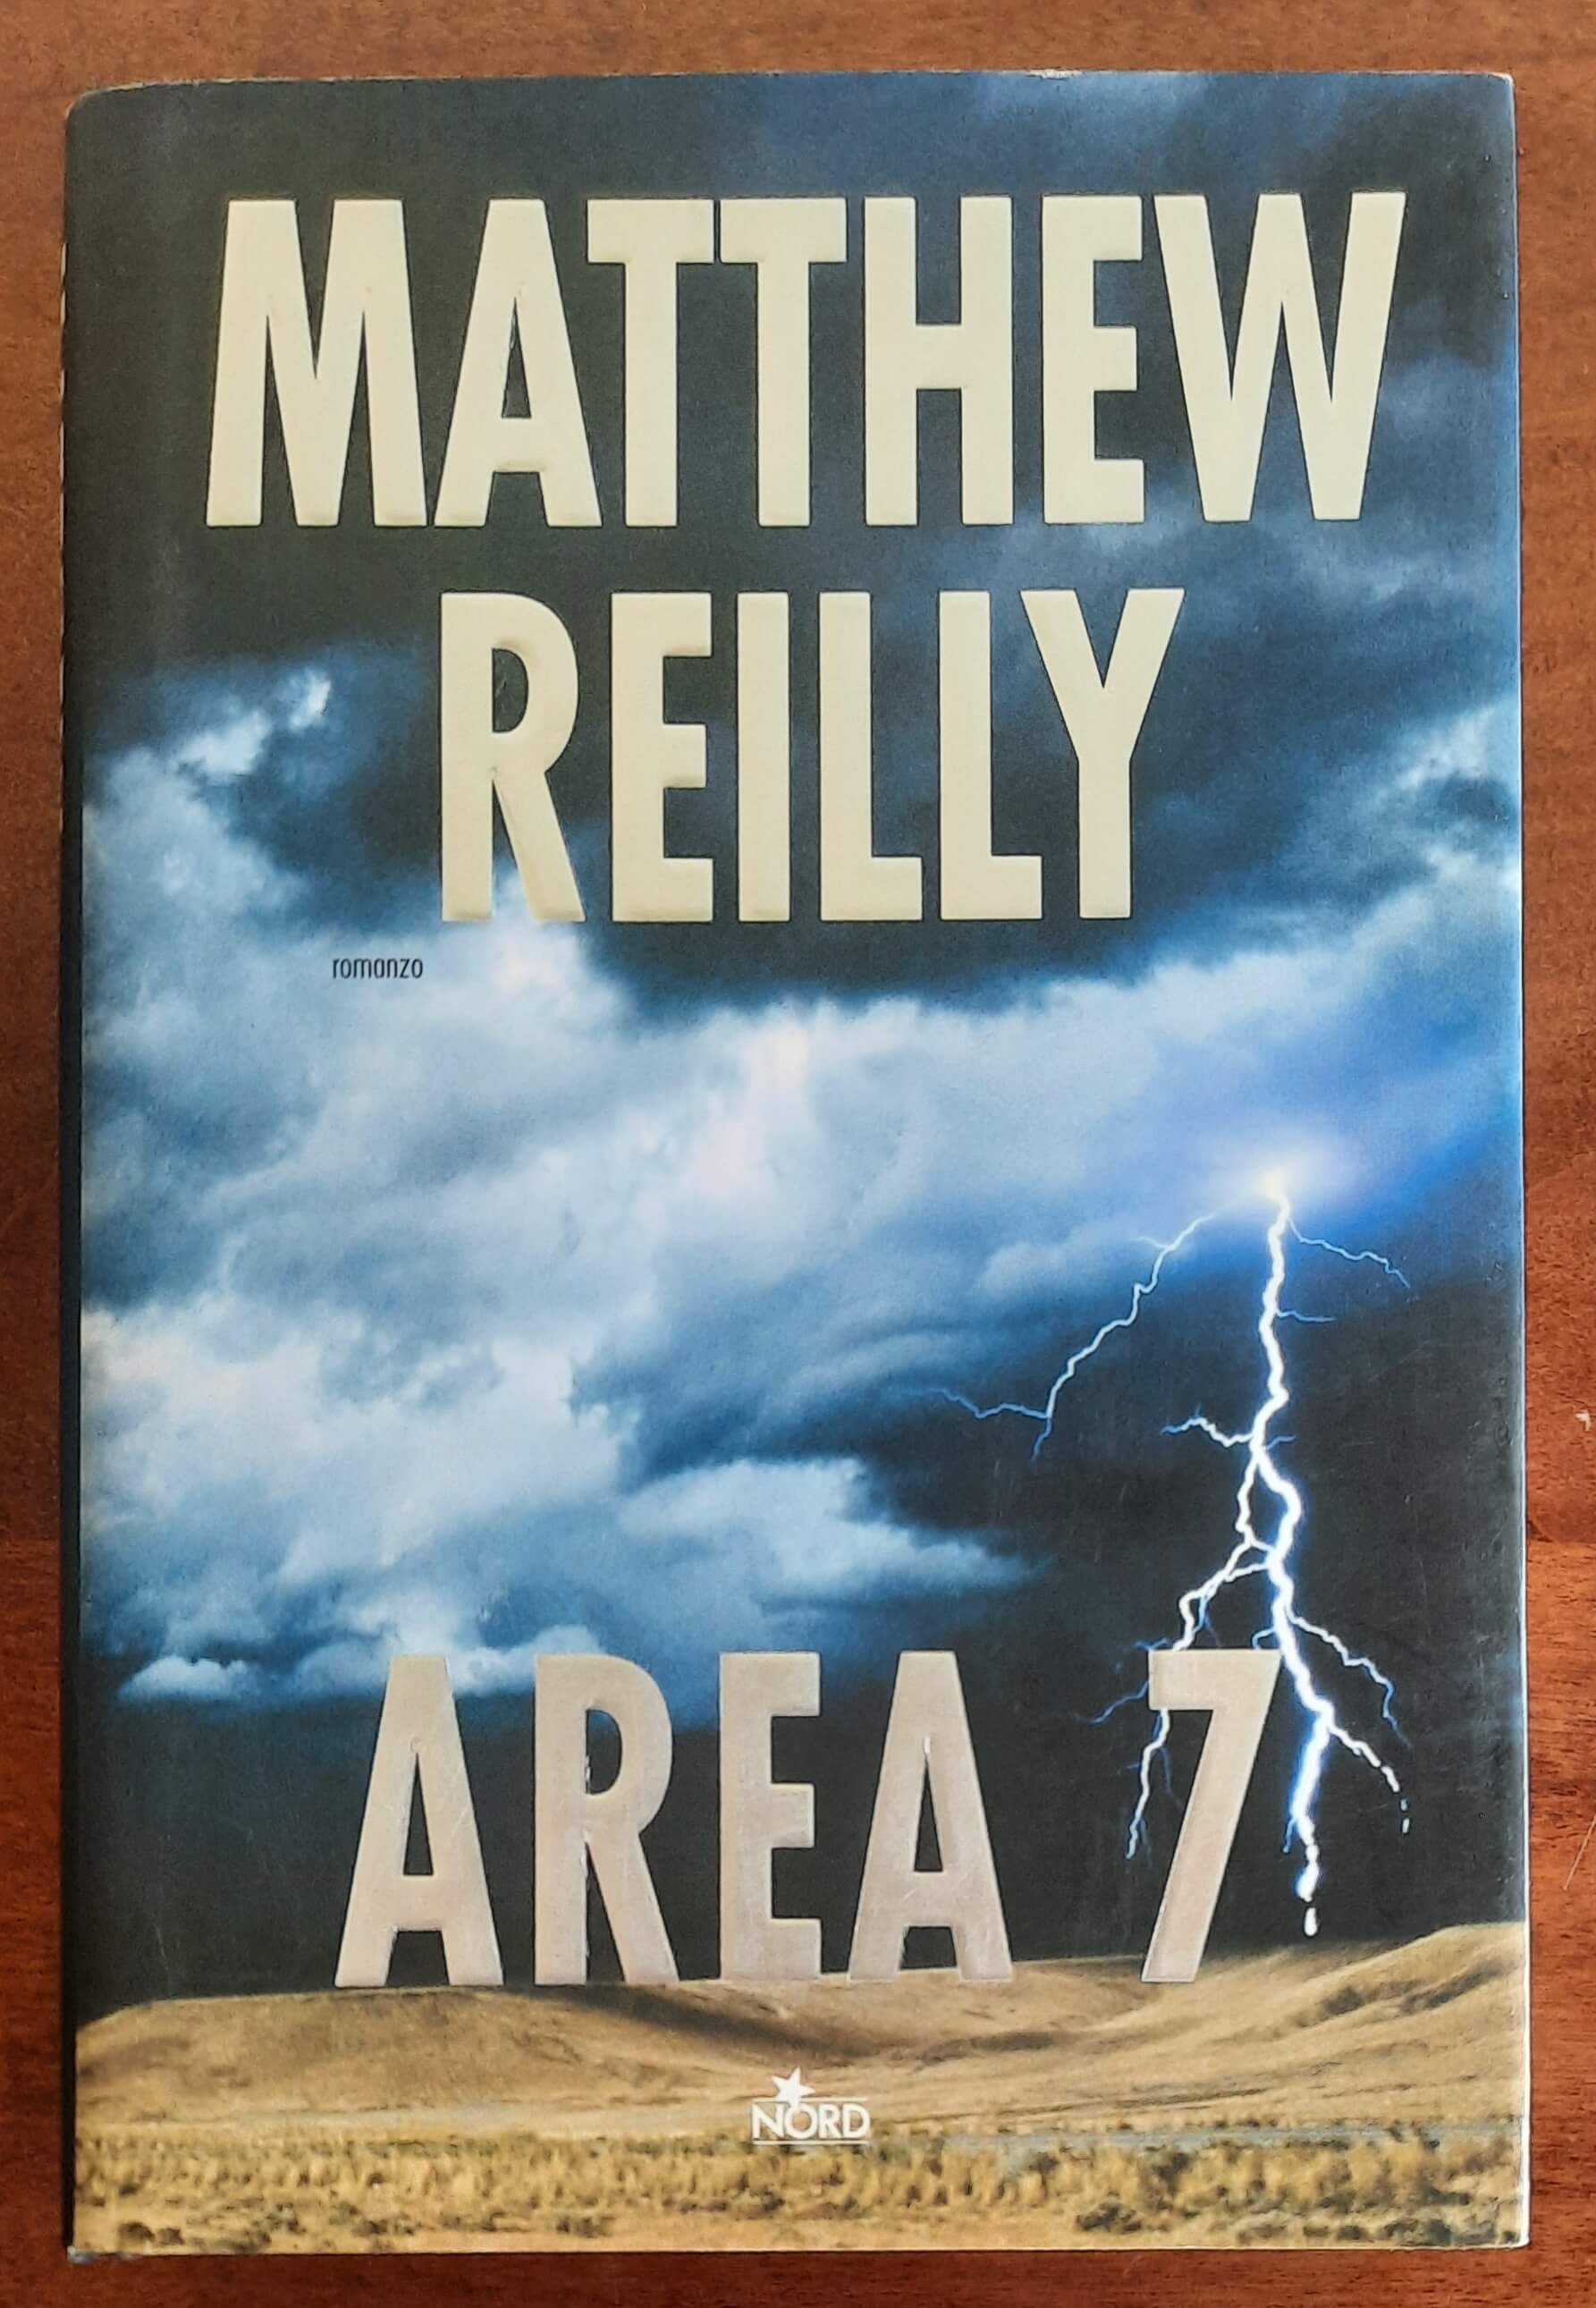 Area 7 - di Matthew Reilly - Editrice Nord